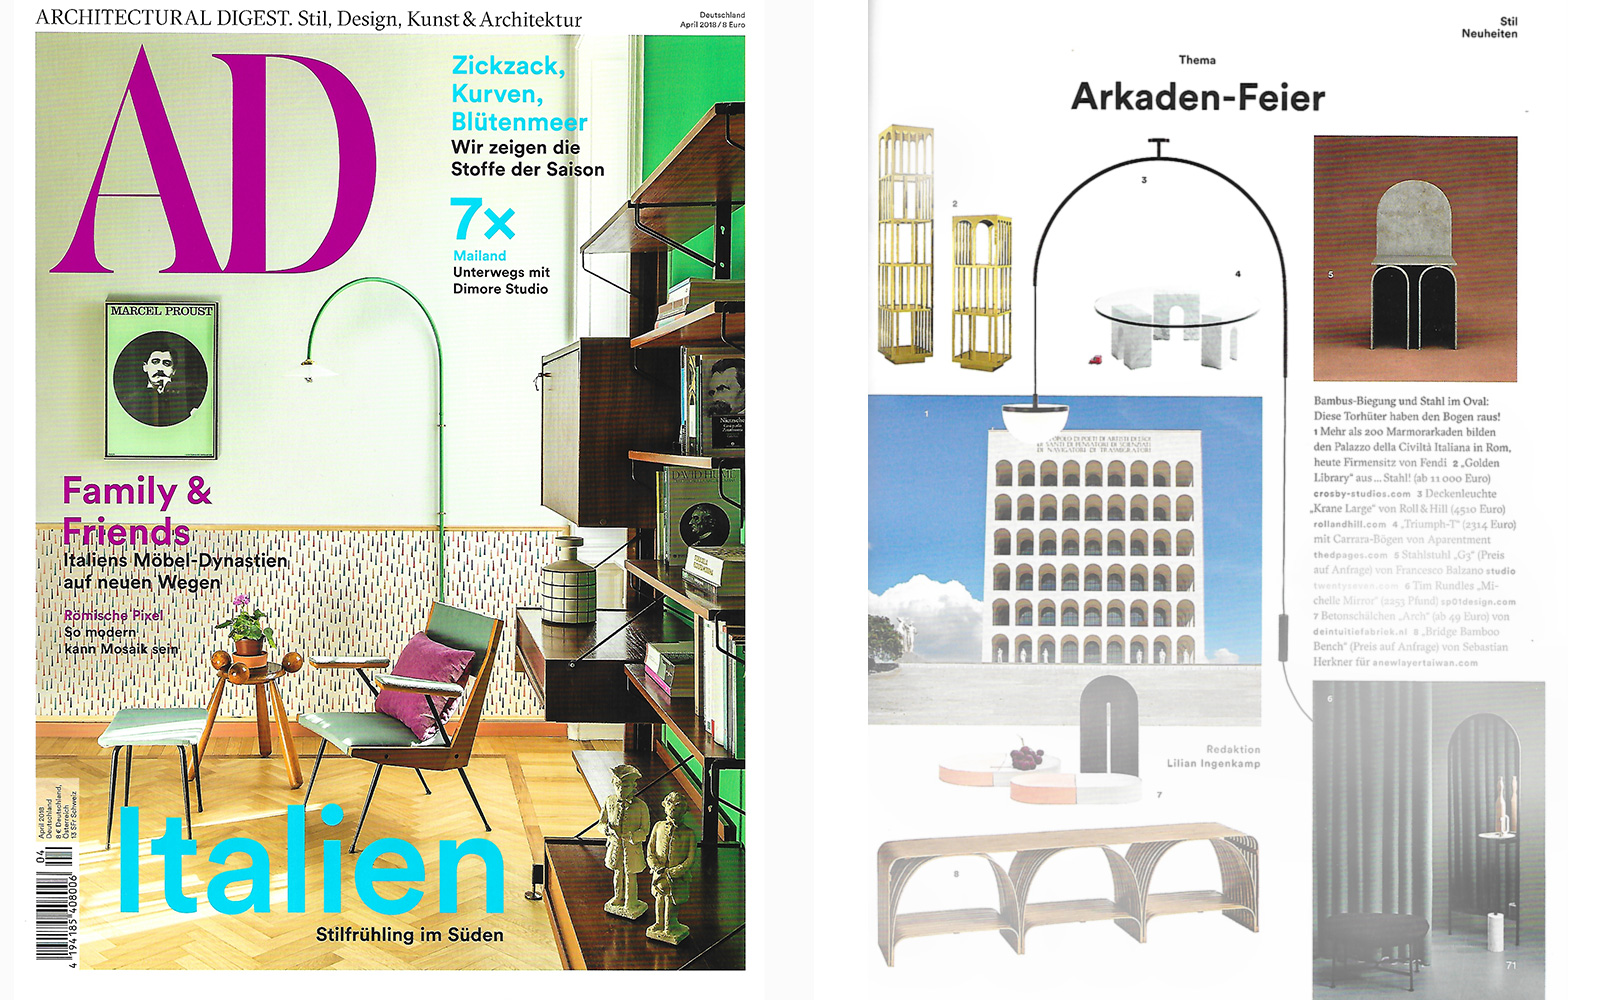 Kolkhoze collectible design in AD Germany